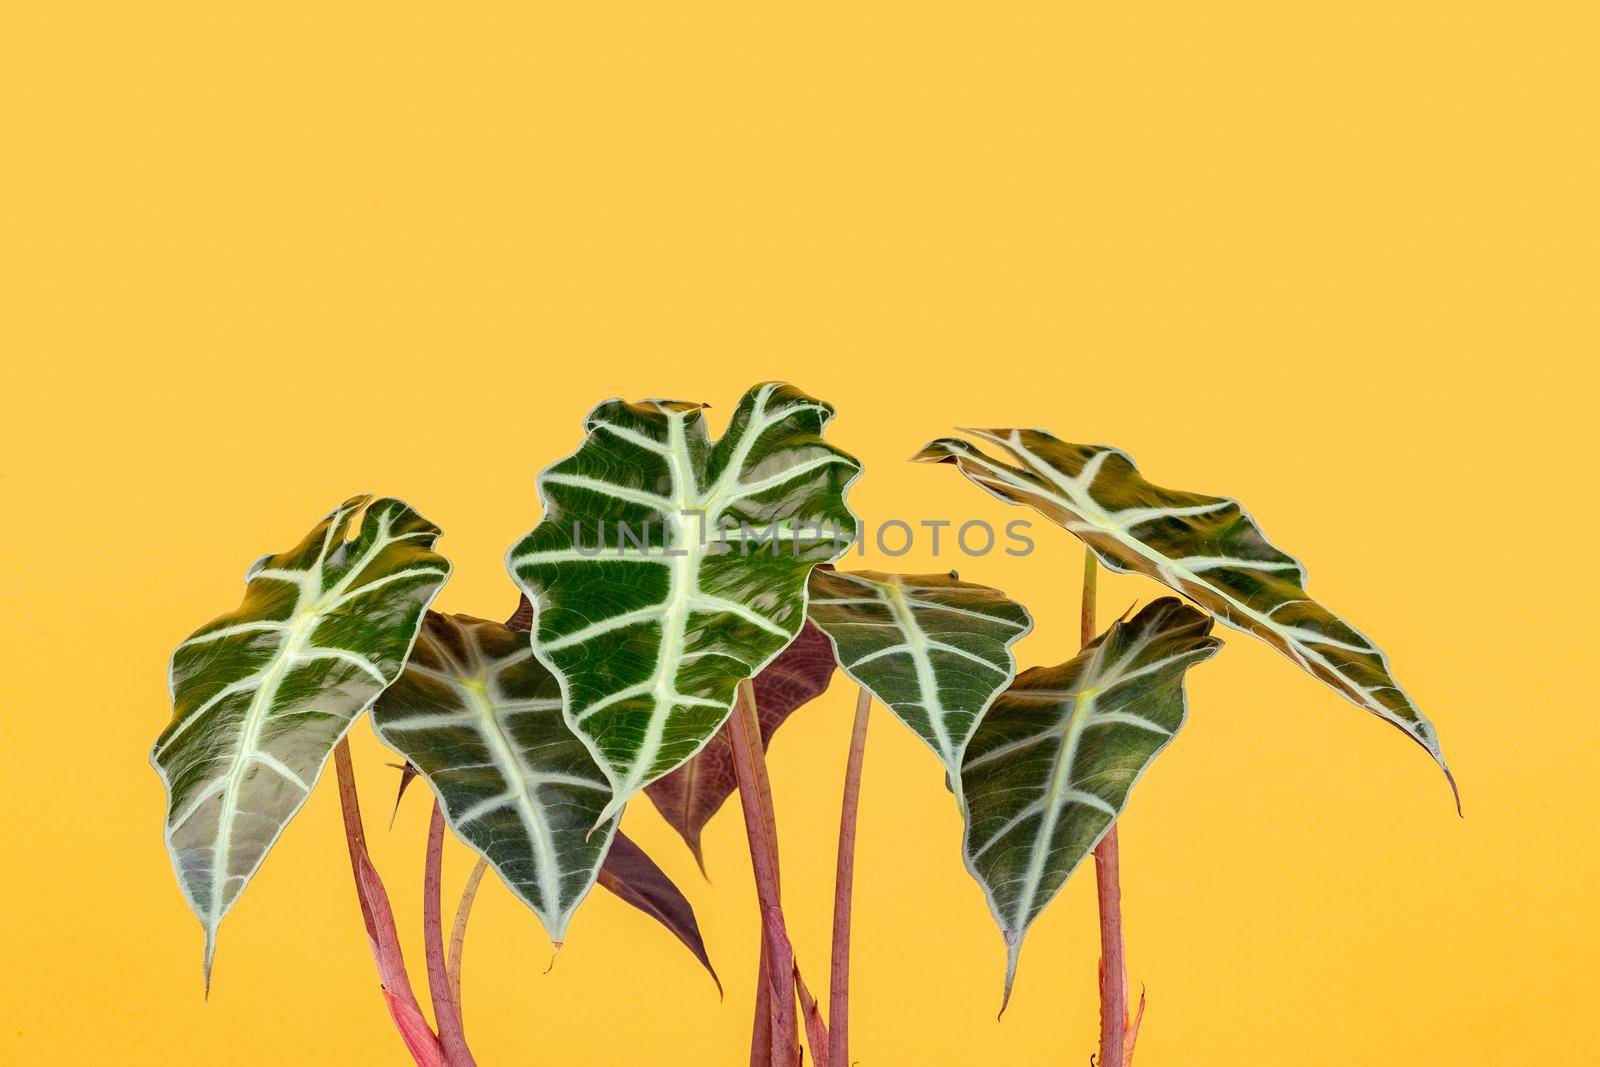 Alocasia African Mask plant over yellow background by Syvanych